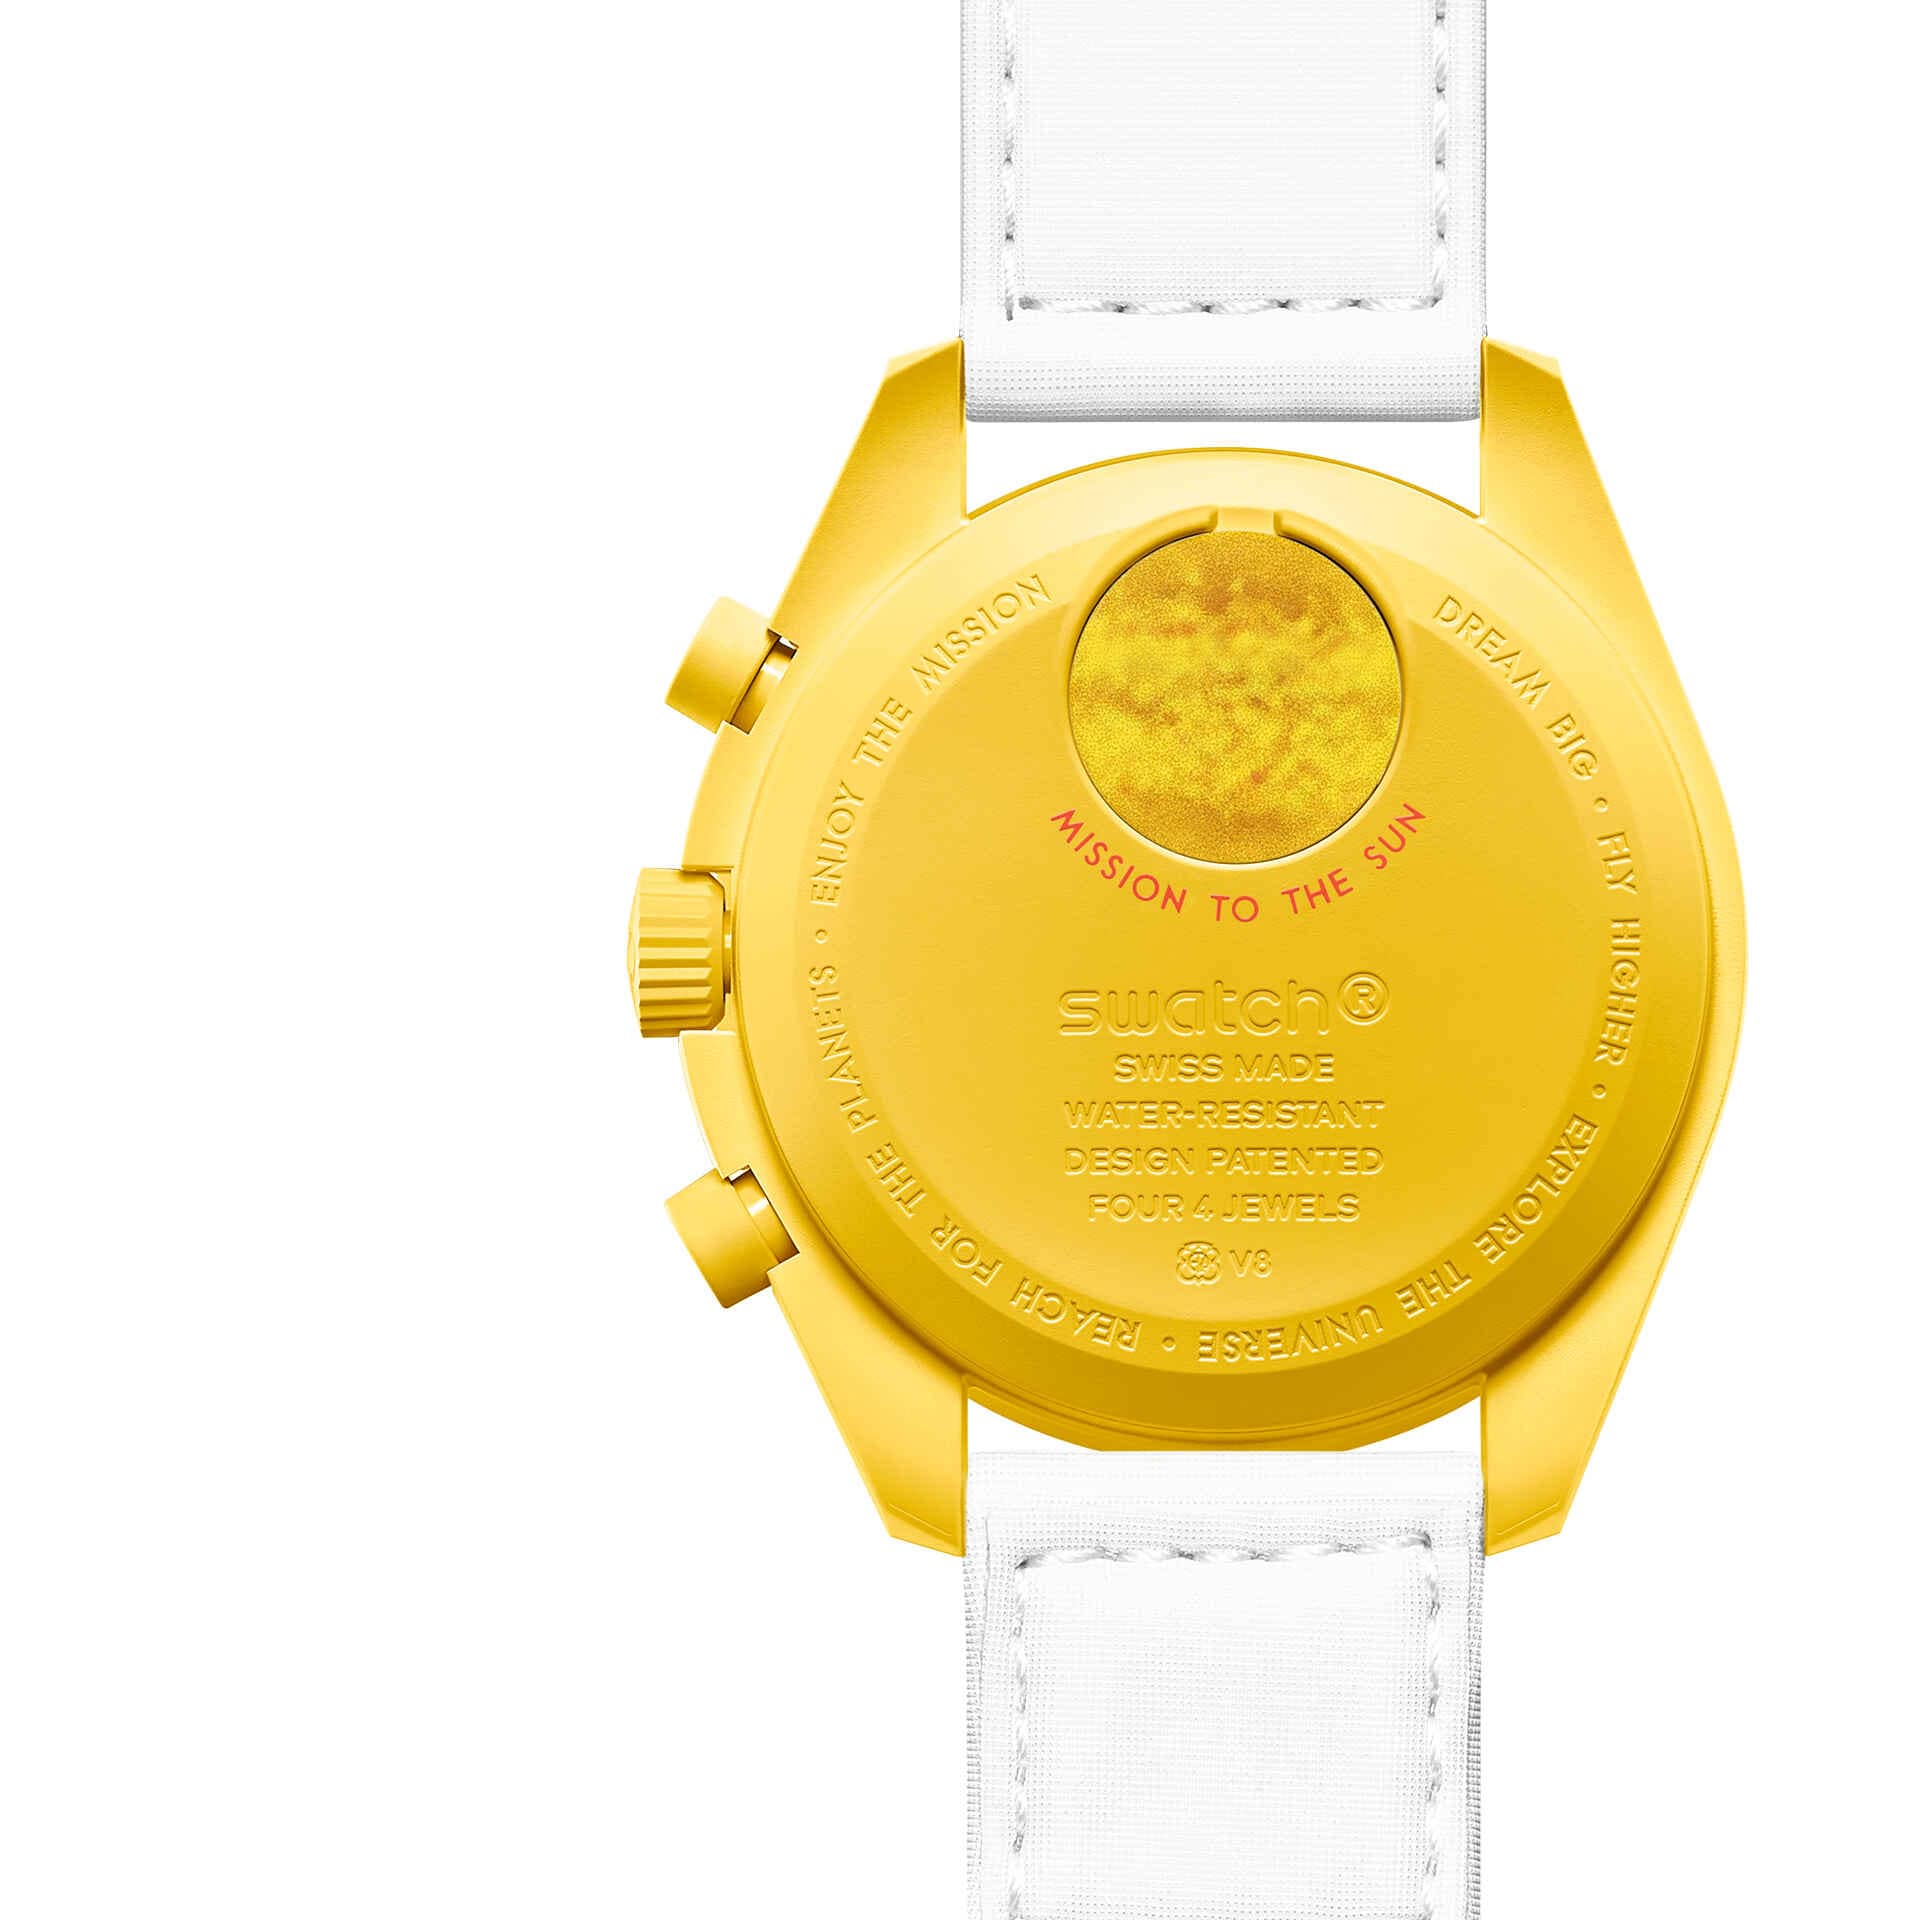 Swatch x Omega Bioceramic Moonswatch Mission to the Sun - Swatch X